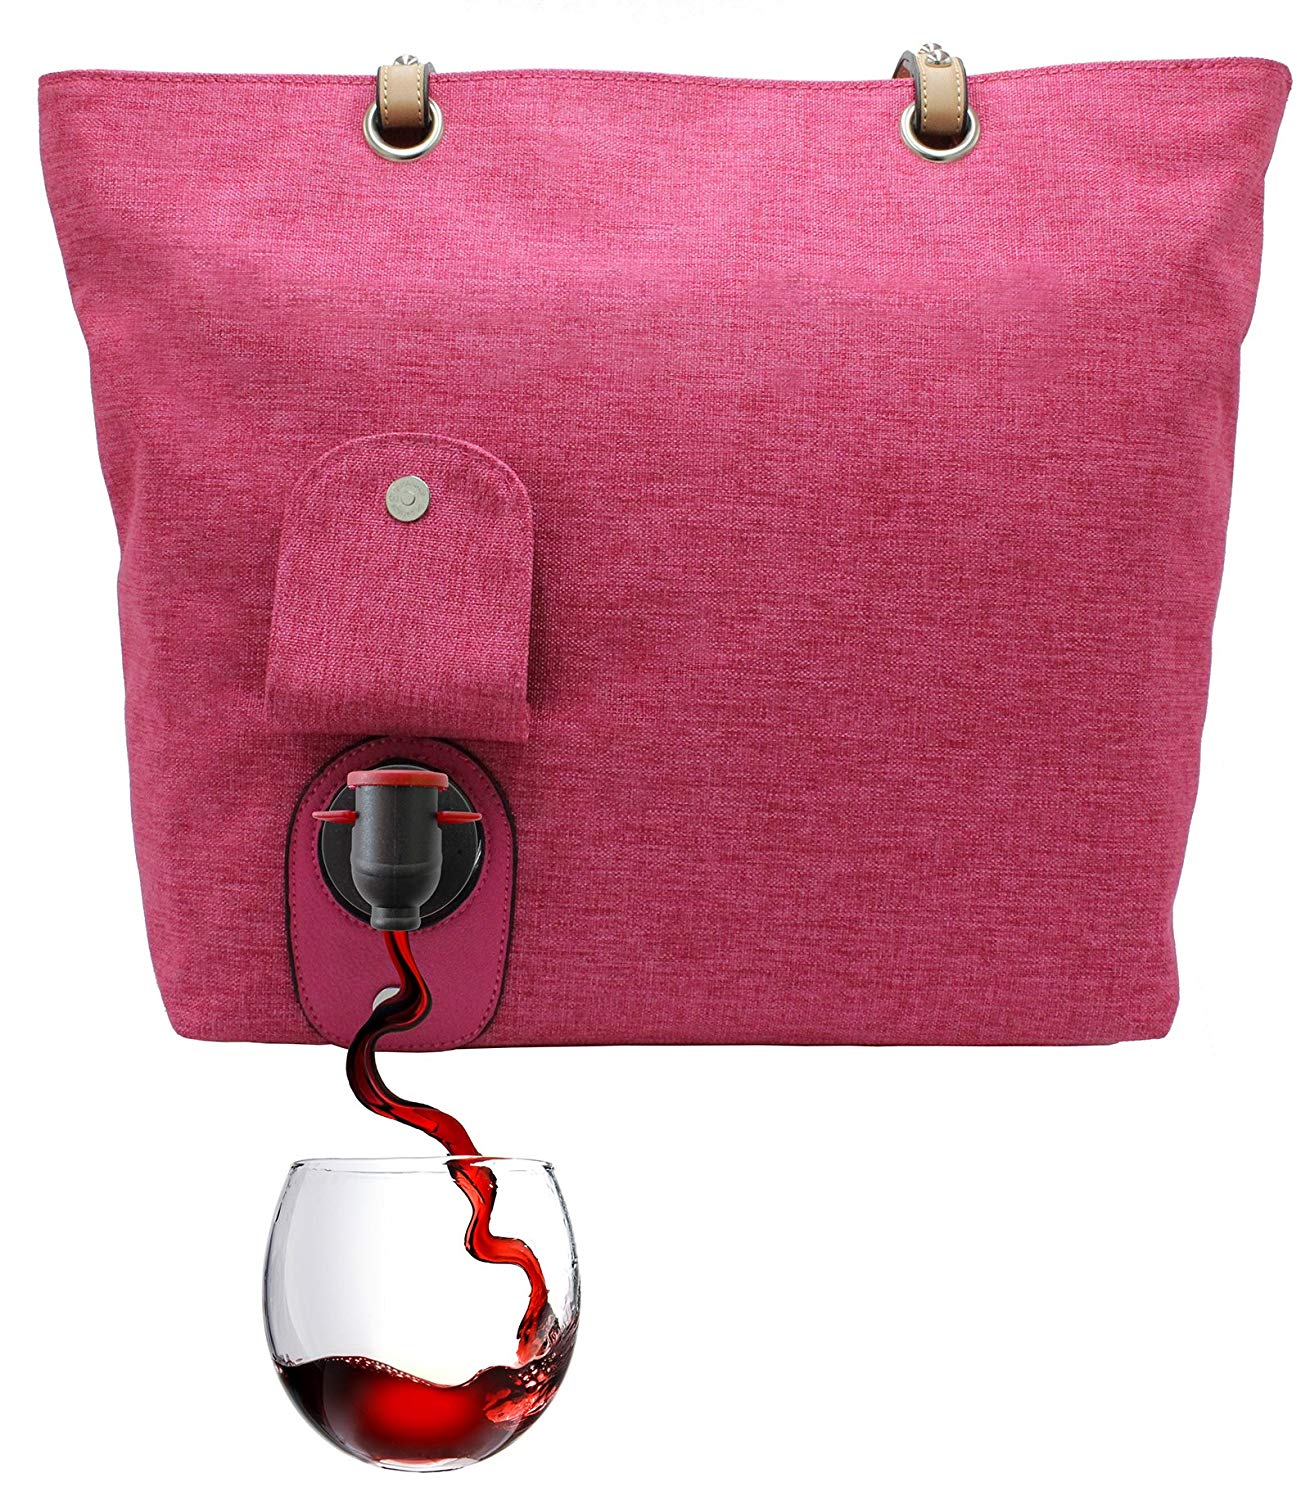 Best Wine Gifts 2022: Portovino Wine Bag for Wine Lovers at Christmas 2022